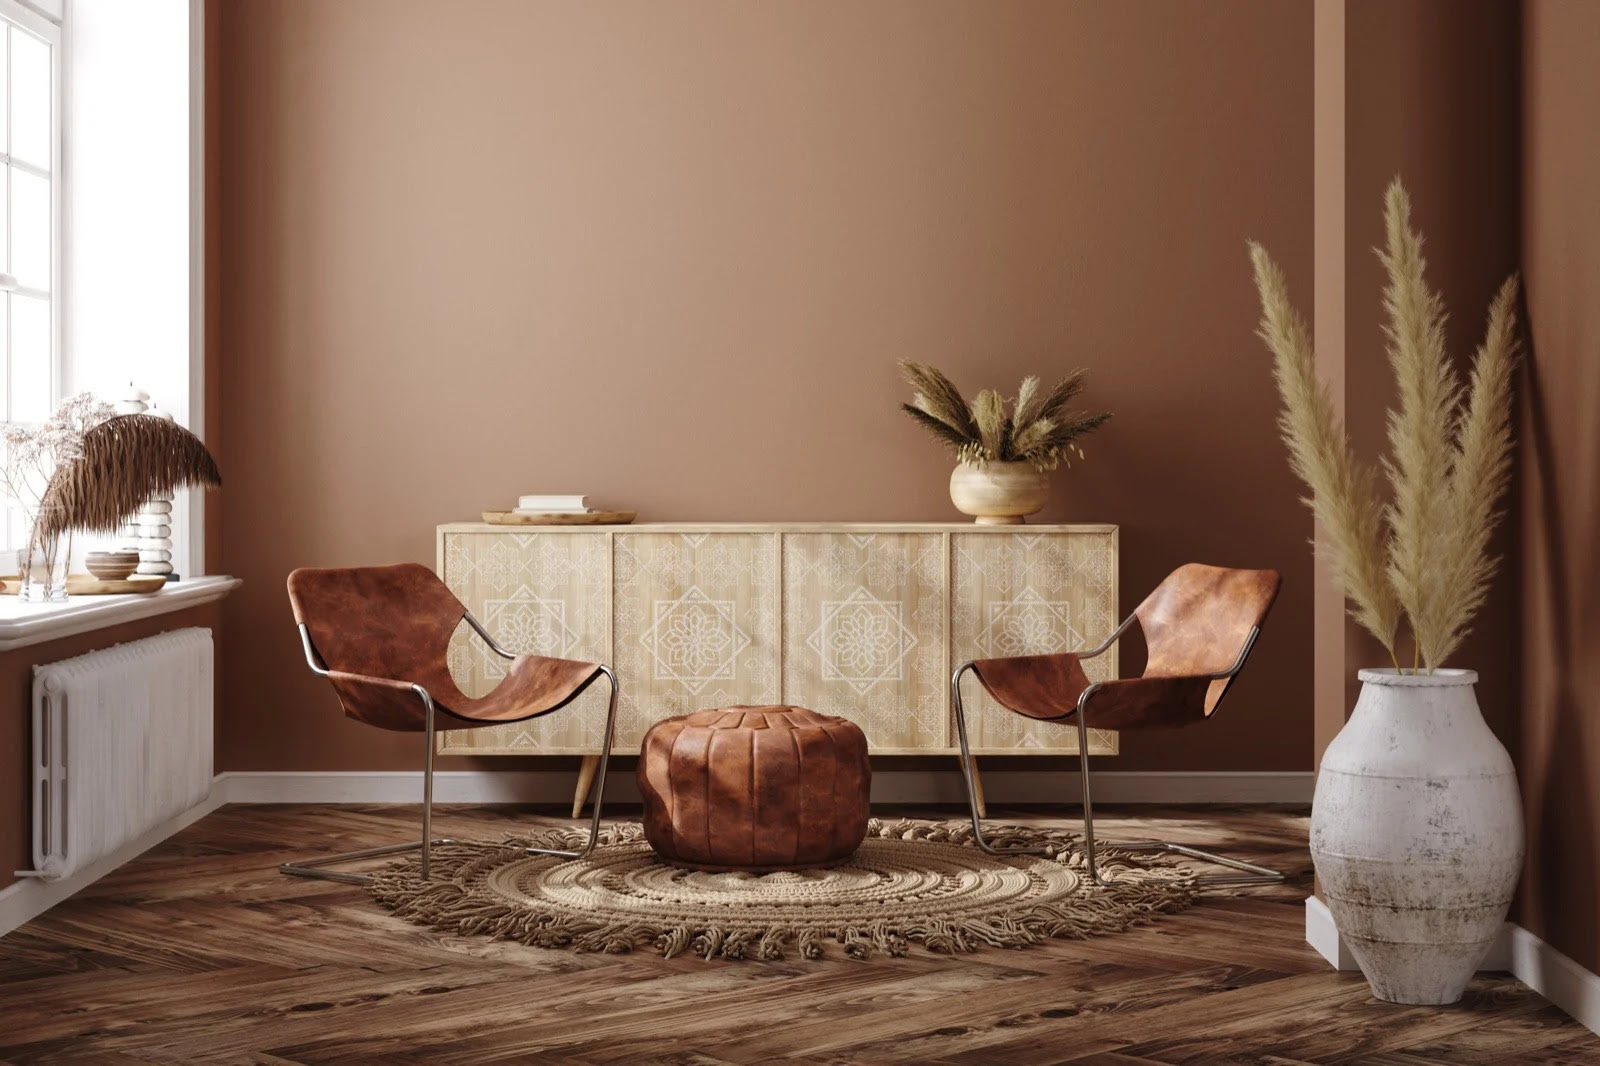 Decorating With Brown: 10 Ways To Use This Warm Versatile Color